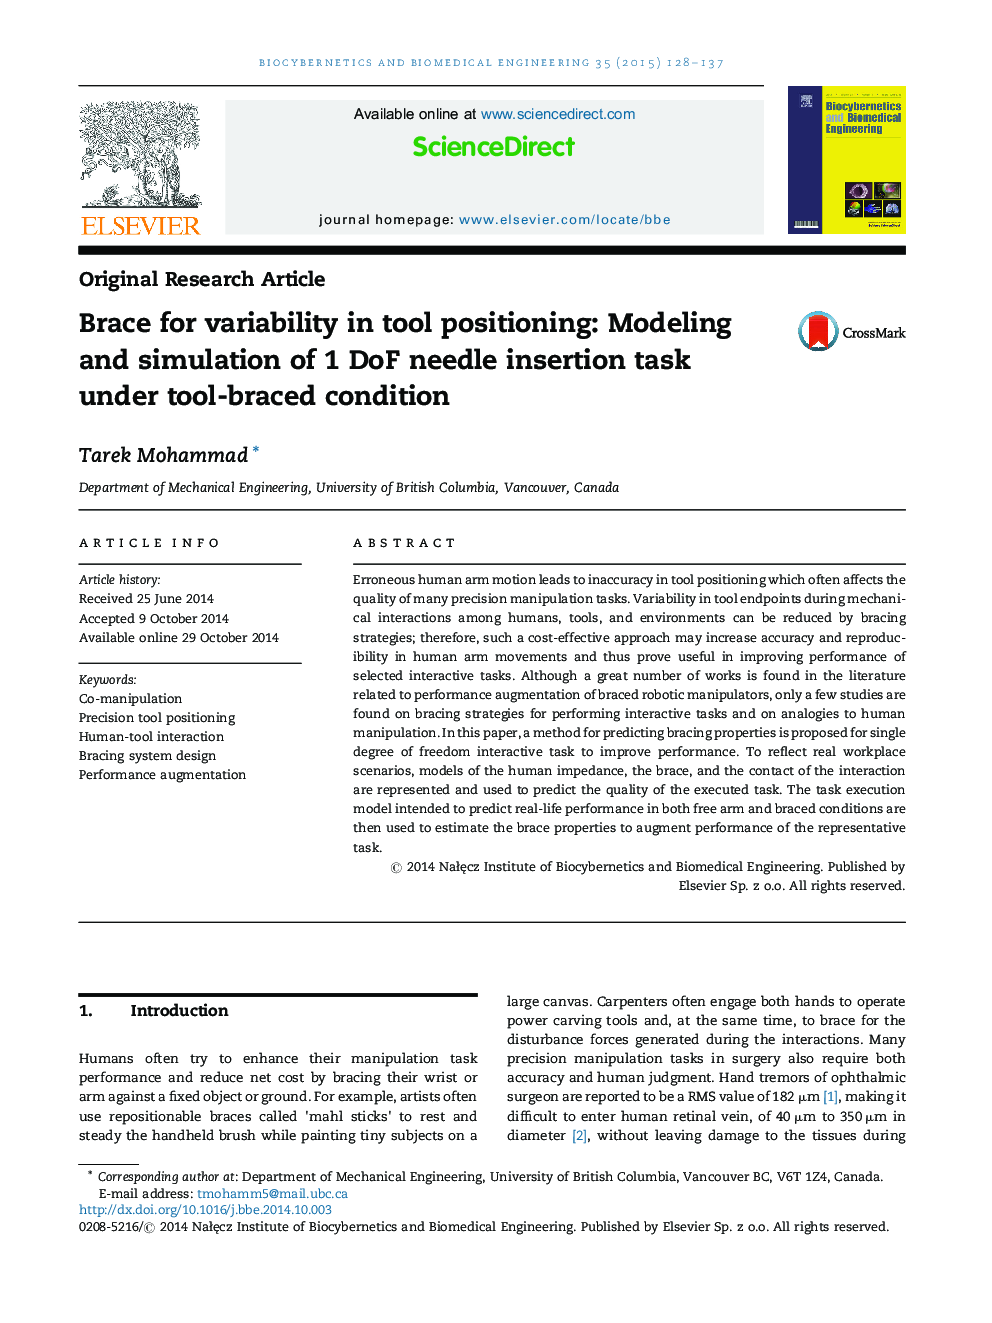 Brace for variability in tool positioning: Modeling and simulation of 1 DoF needle insertion task under tool-braced condition